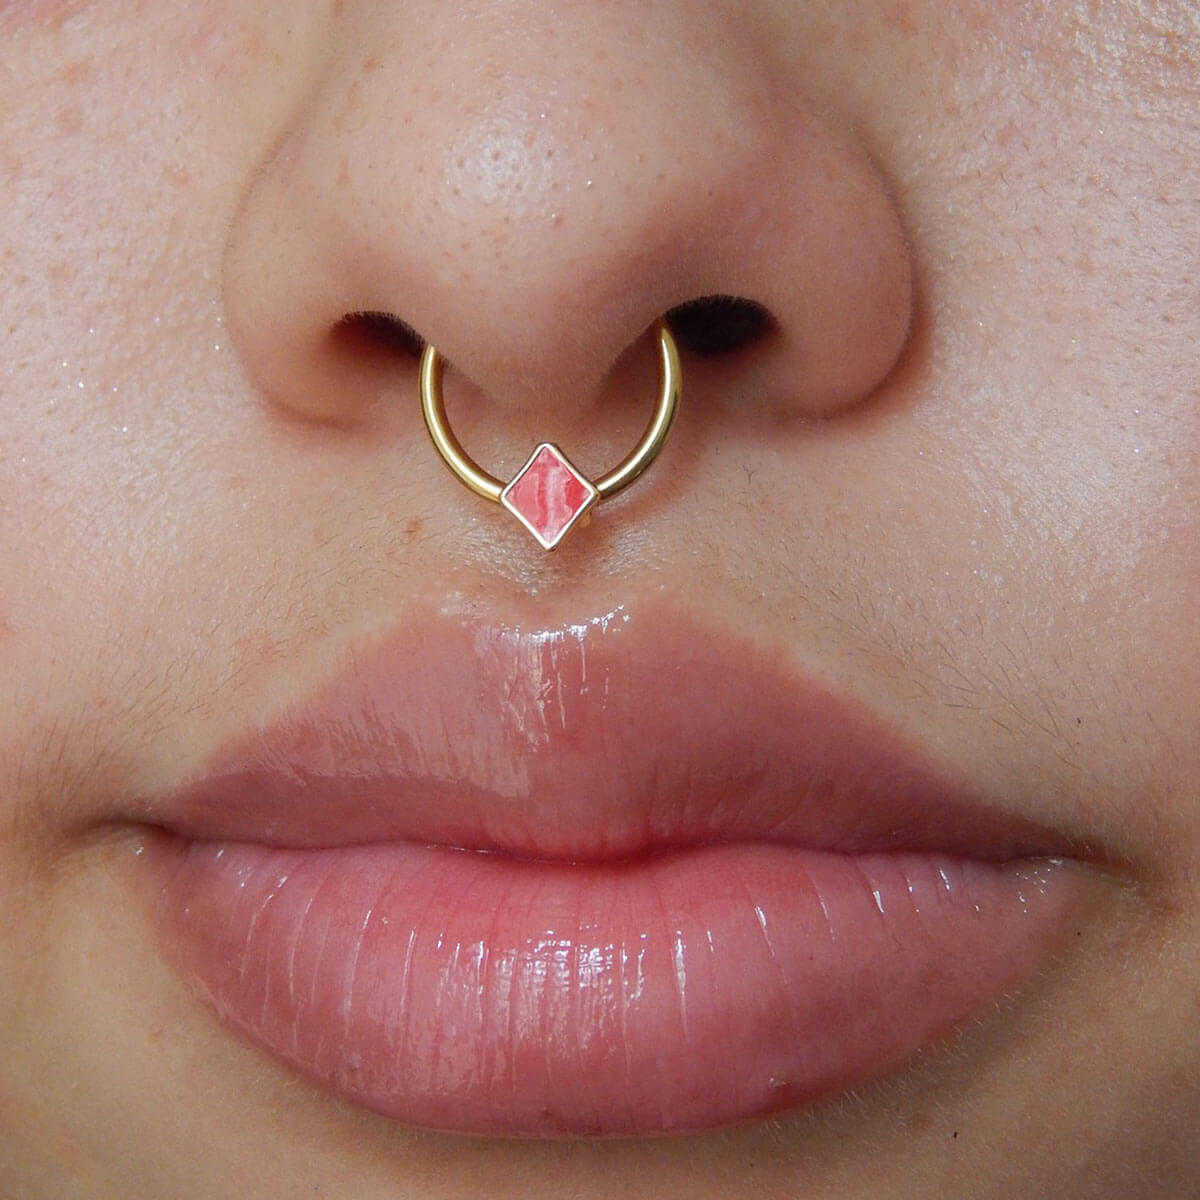 16G Poker Themes Silver and Gold Hinged Segment Septum Ring